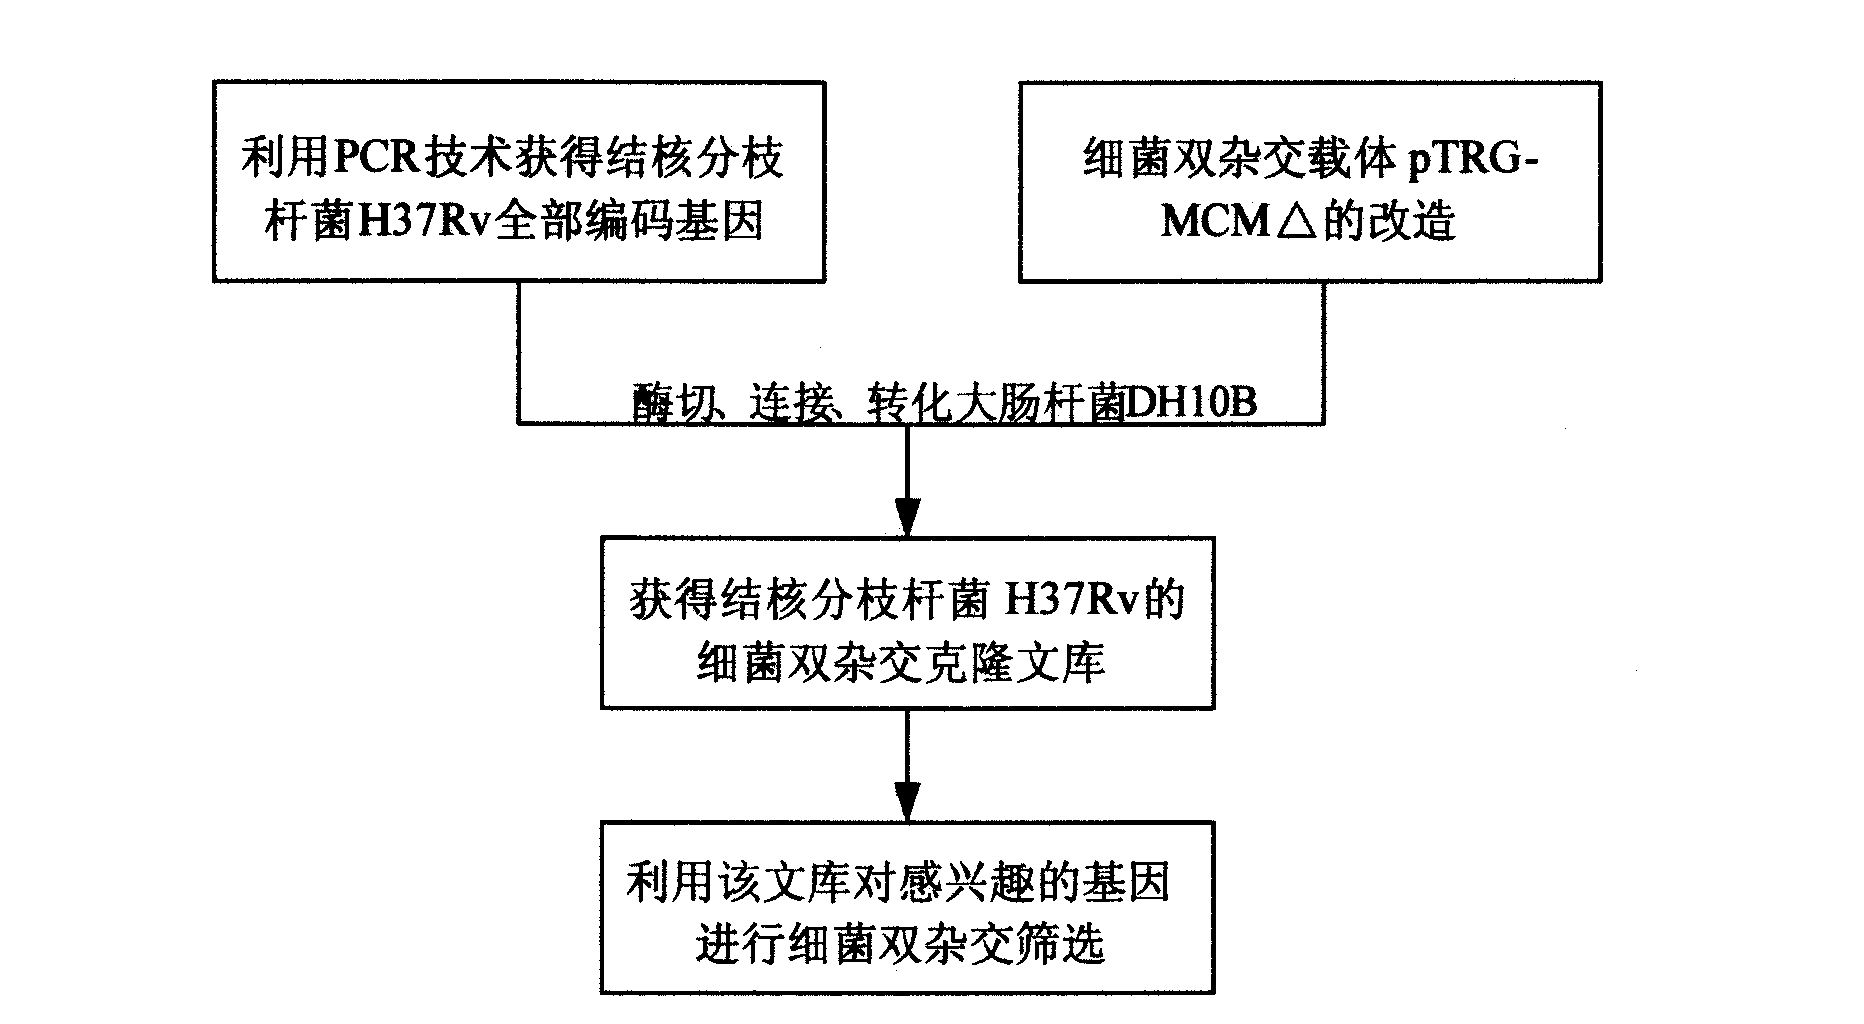 Construction method of complete mycobacterium tuberculosis genome ORF clone library and application thereof